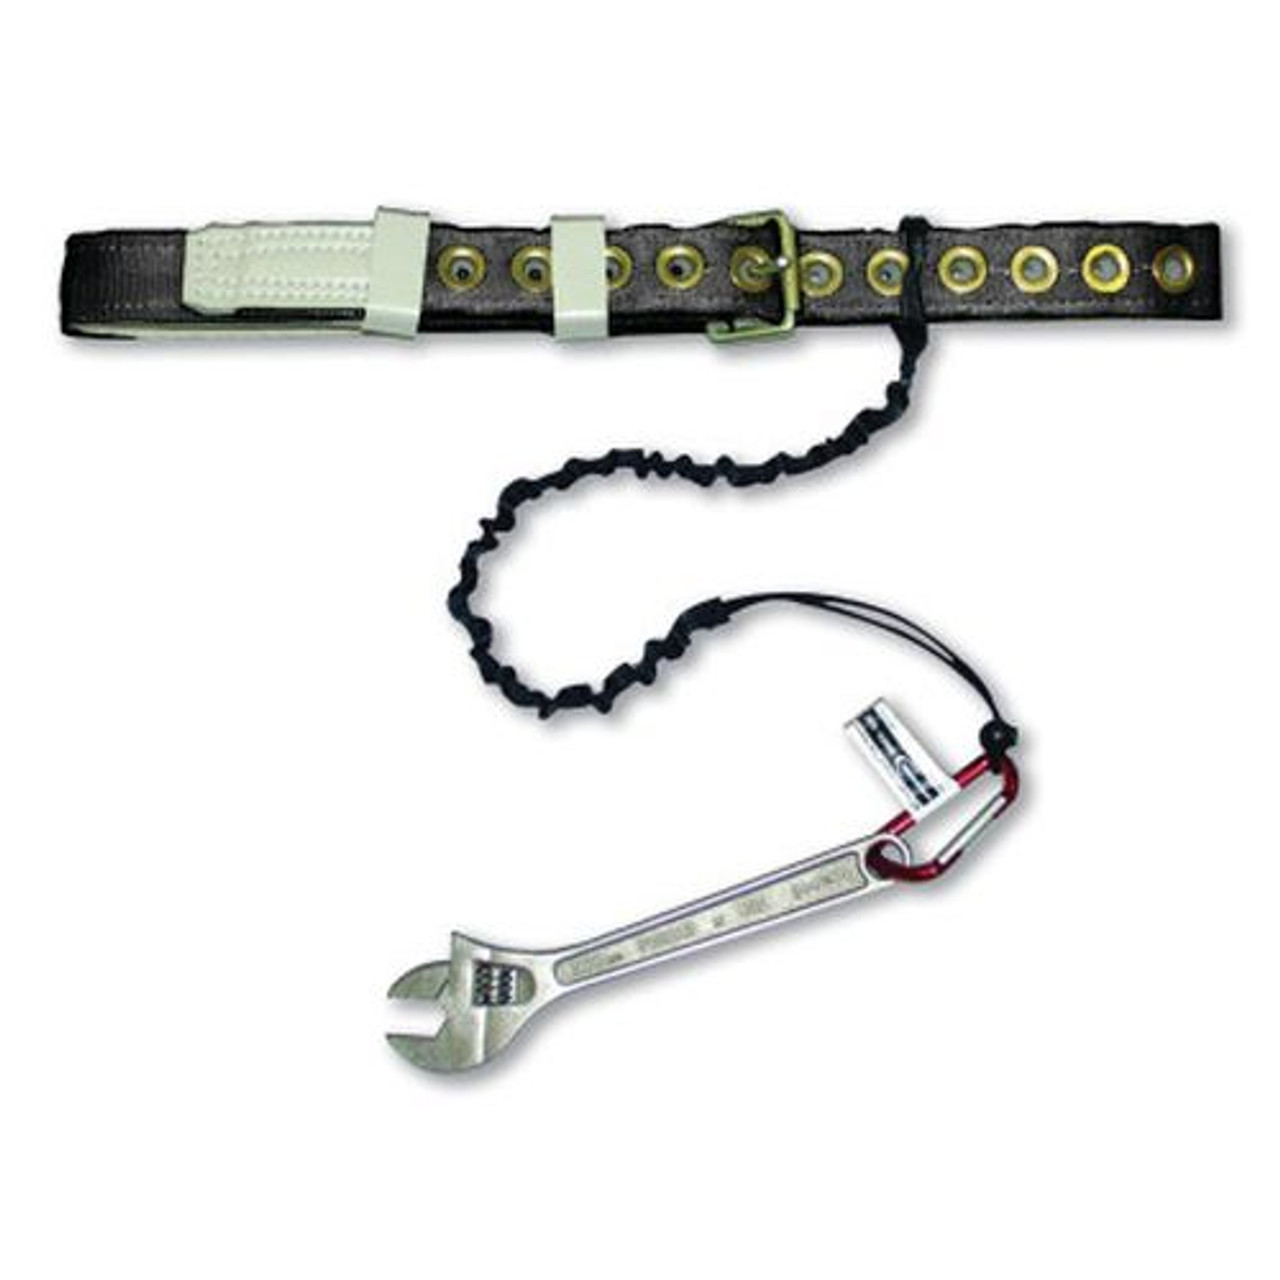 Honeywell 9077 Bandit Tool Lanyard, 13 in, Attaches to User's Belt